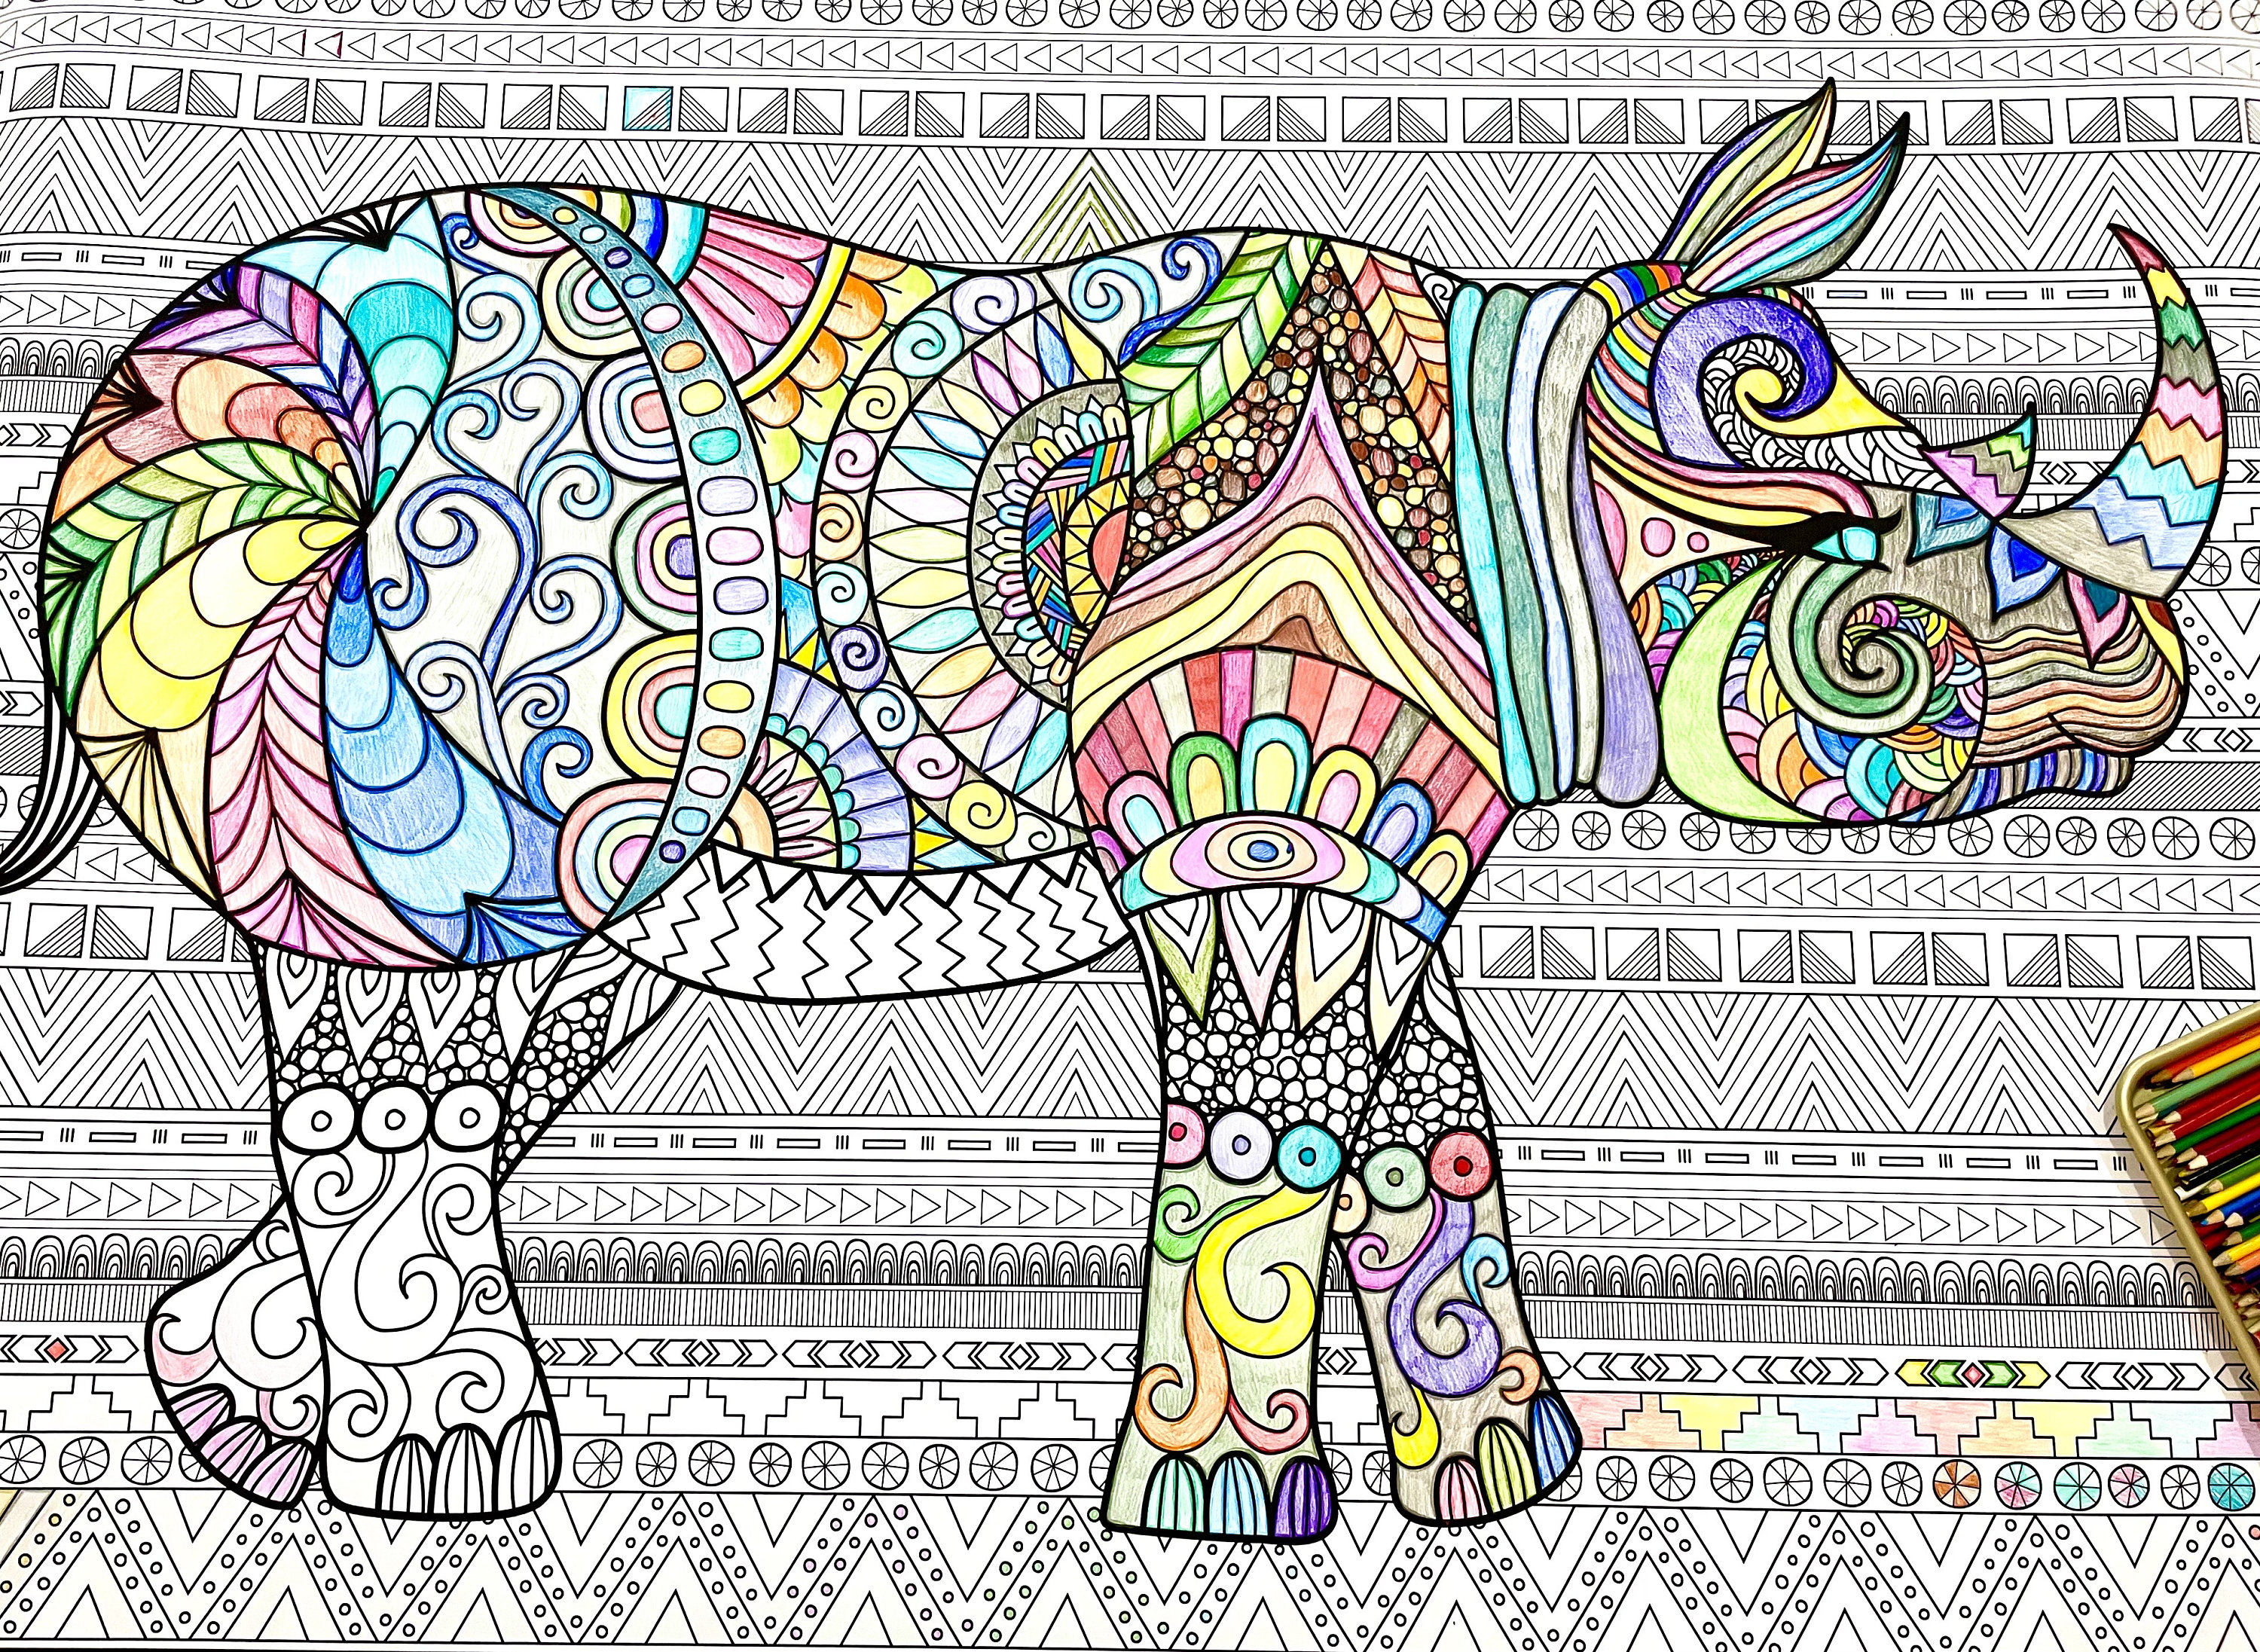 Rhino coloring page giant coloring sheet with name rhino coloring safari poster adult rhino gift for kids safari party activity